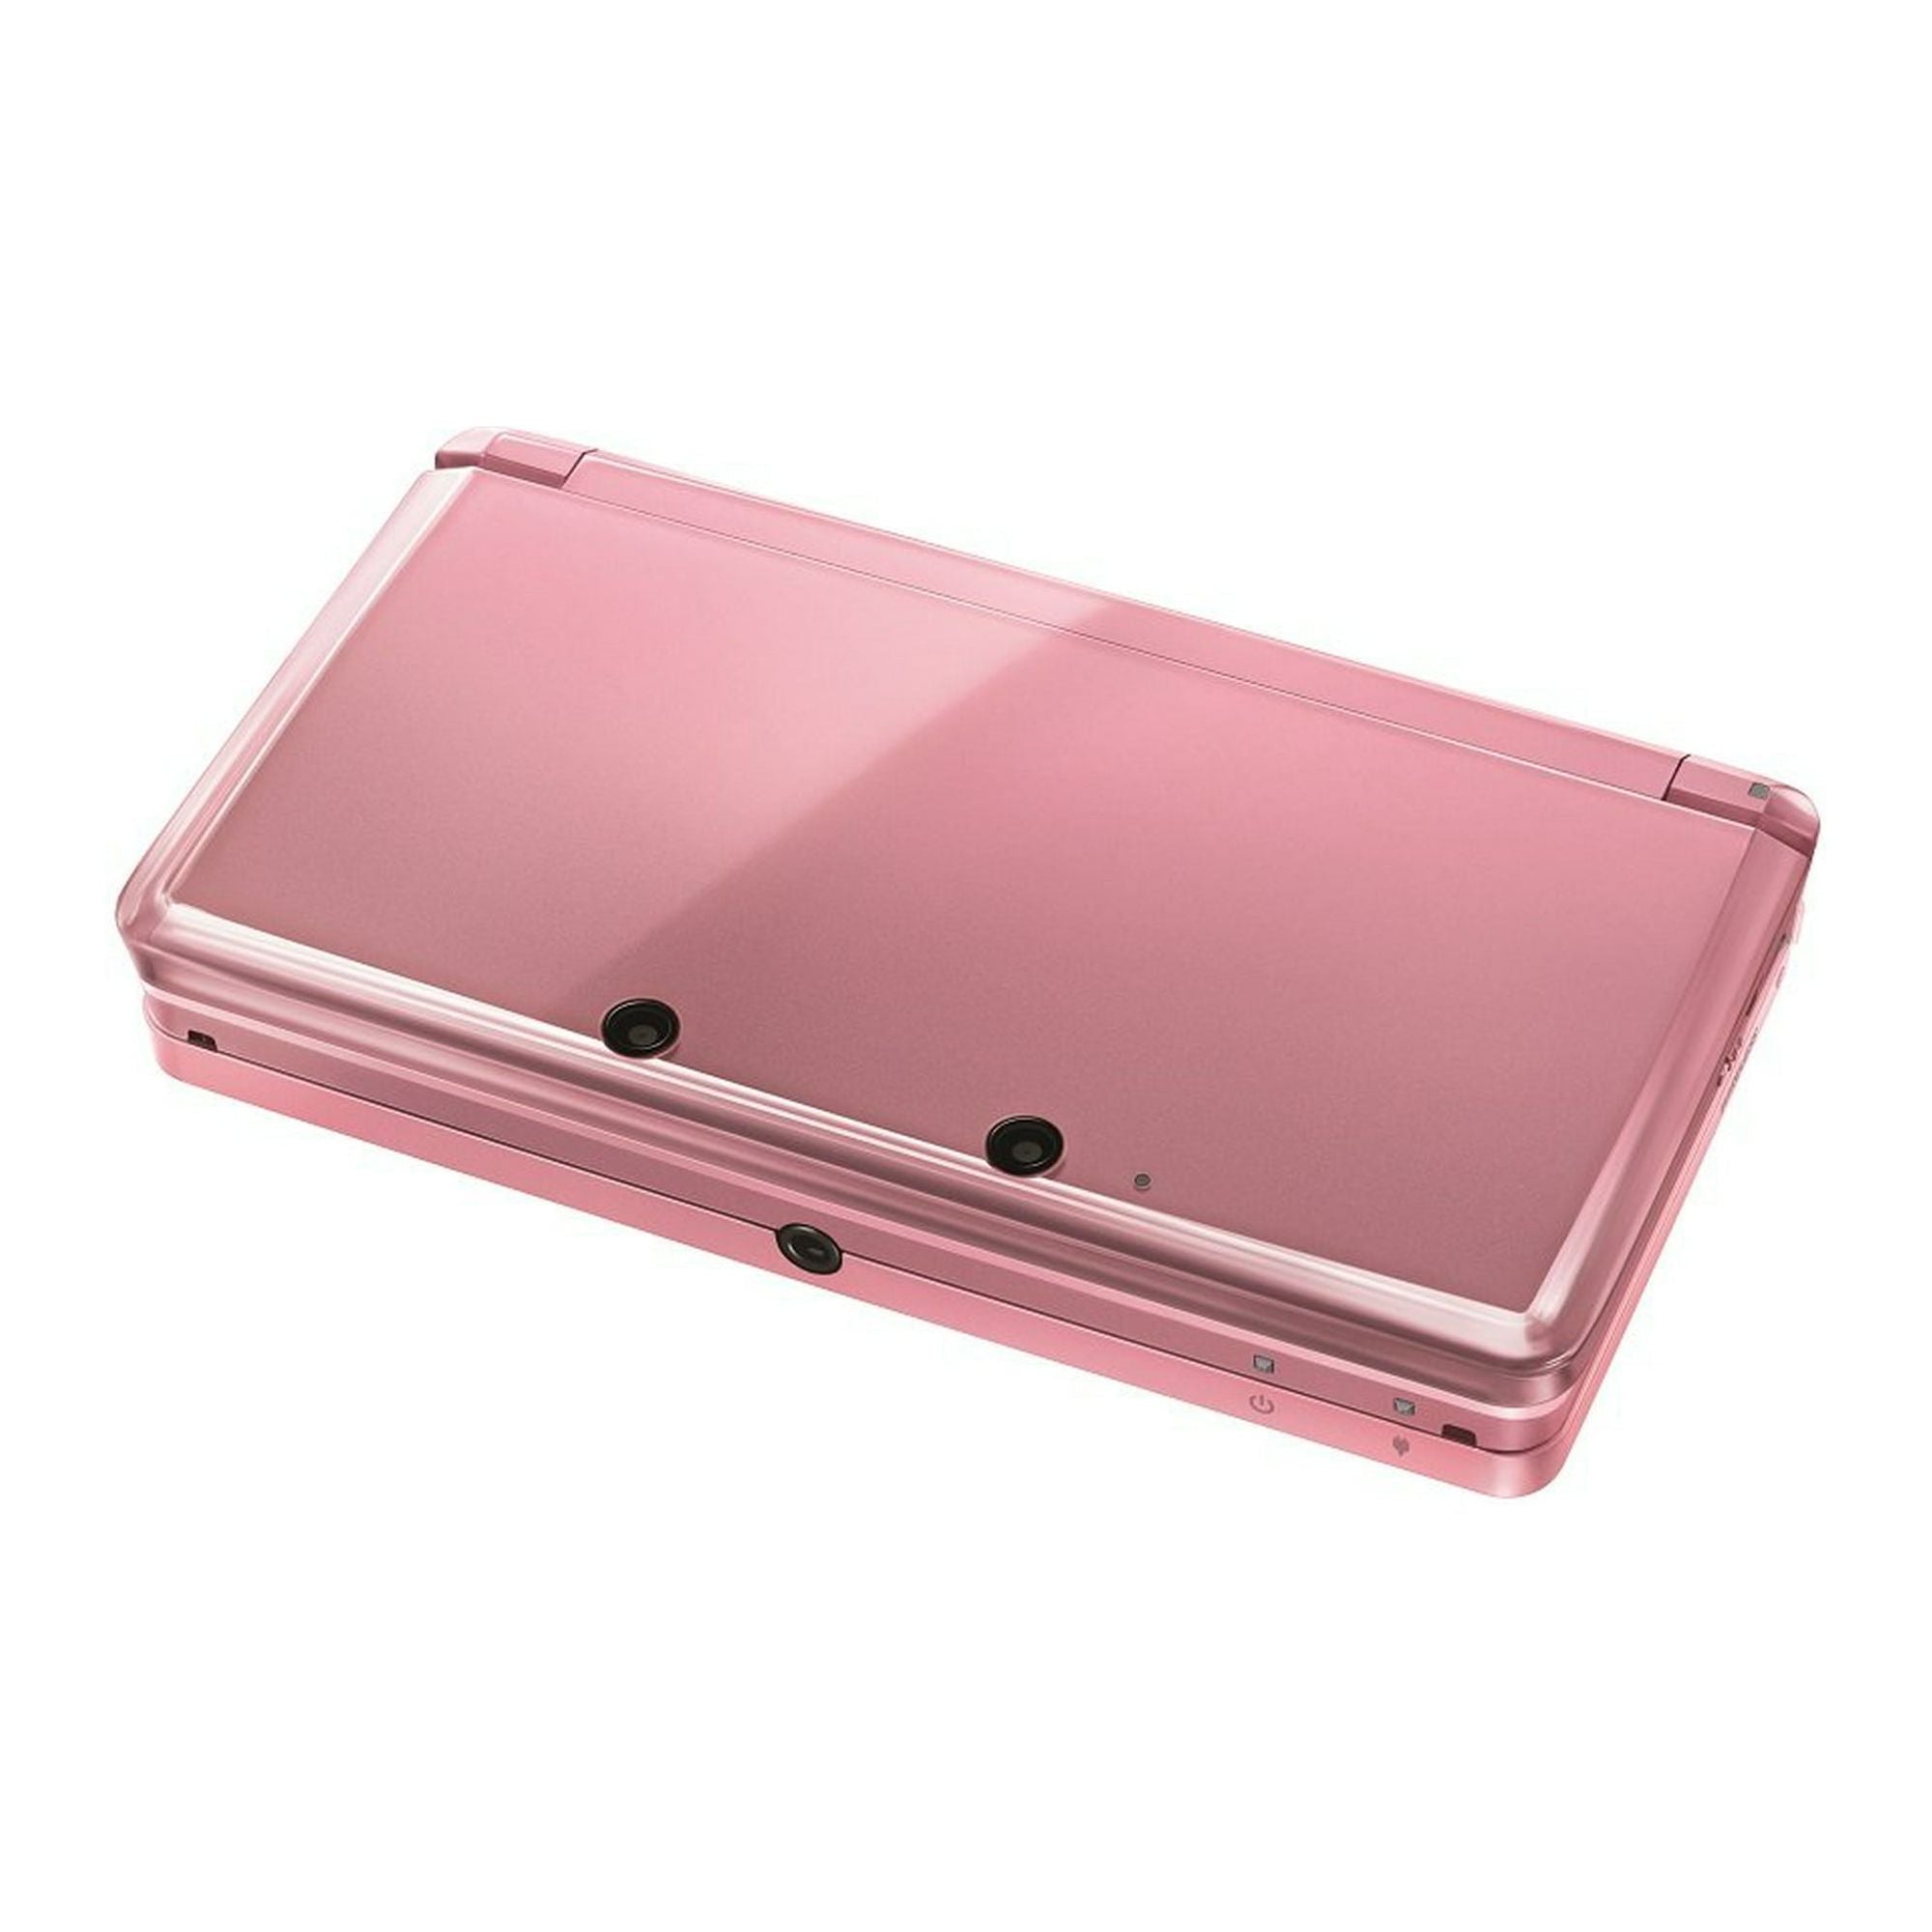 3DS System (Pearl Pink)